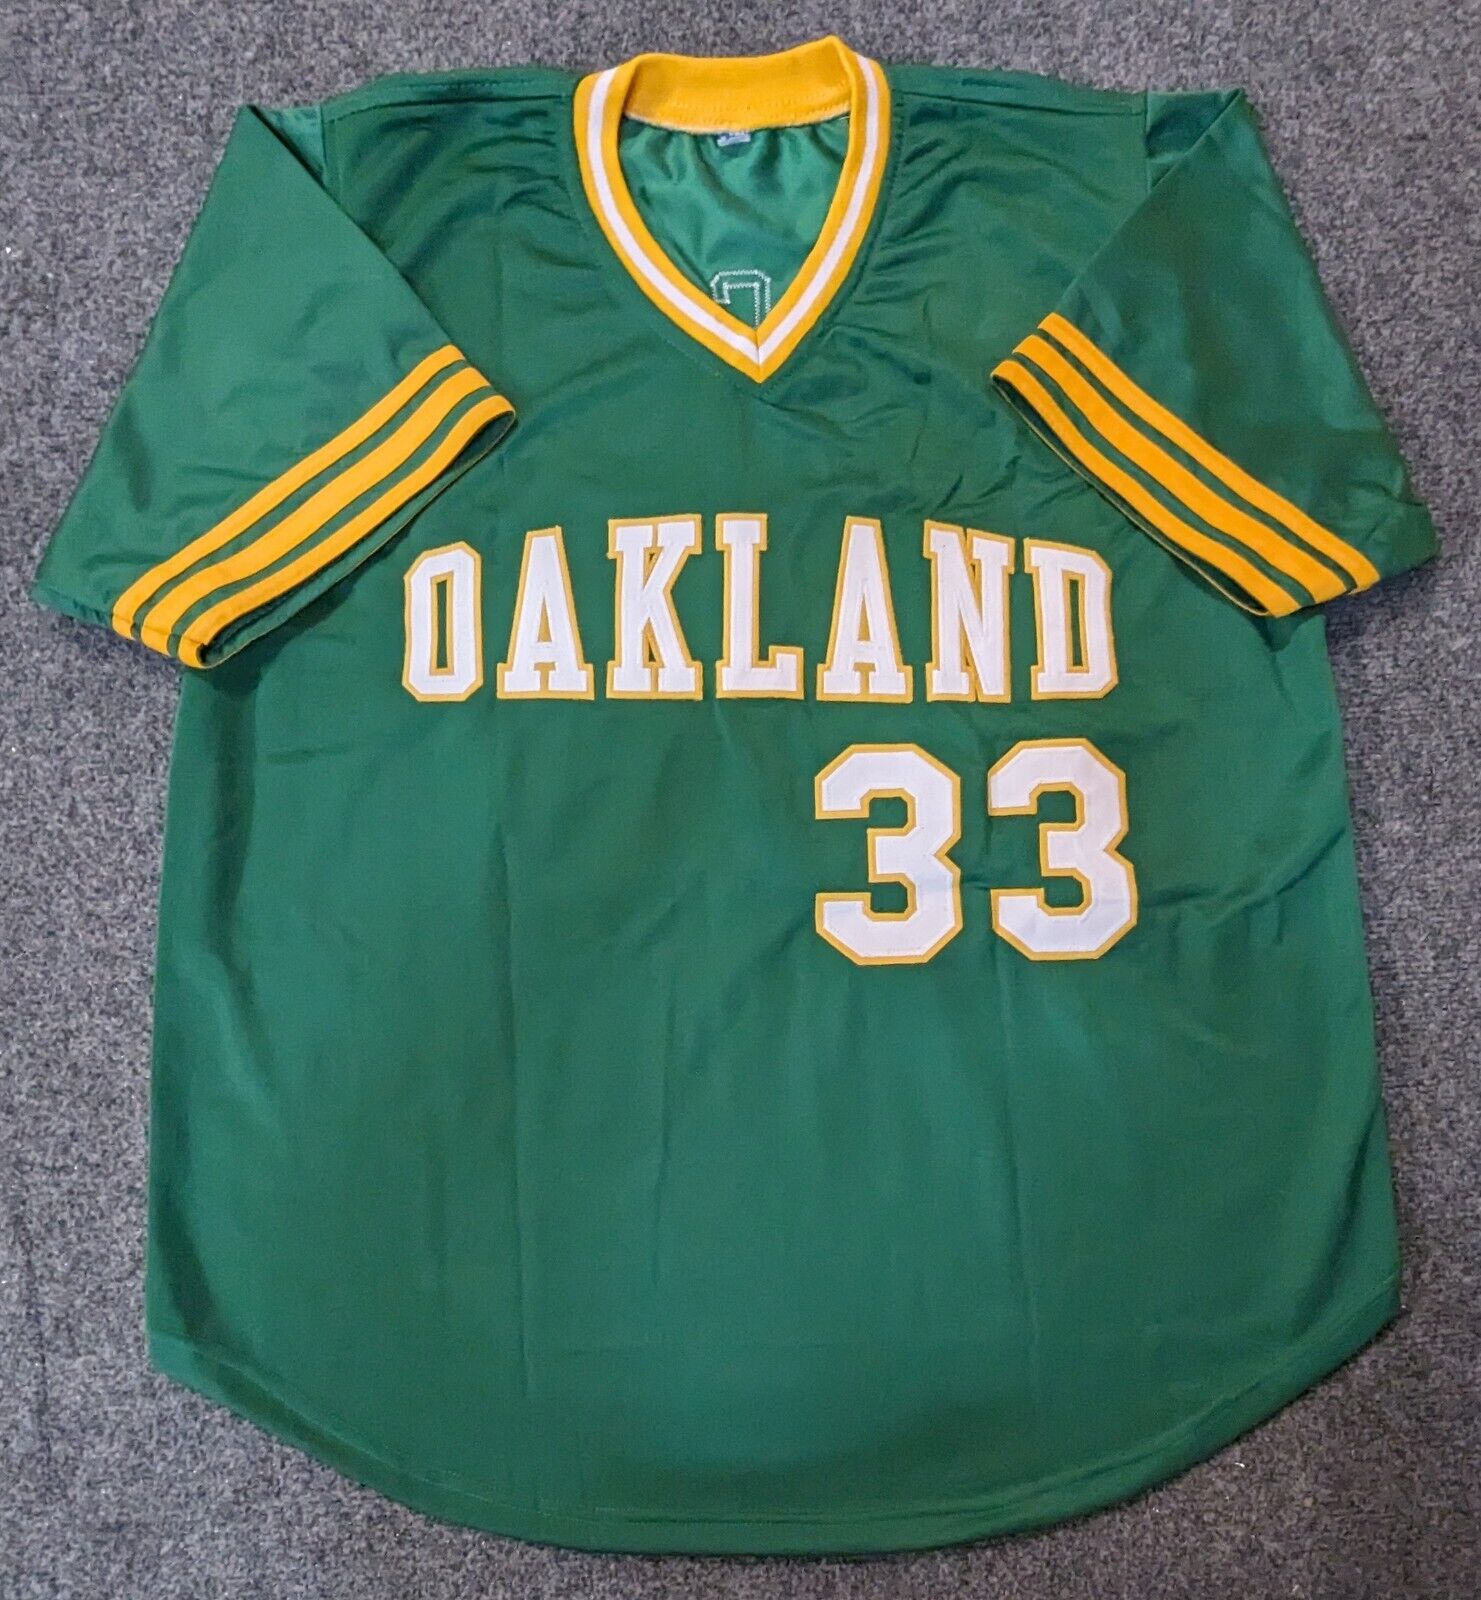 Jose Canseco Oakland A's Jersey